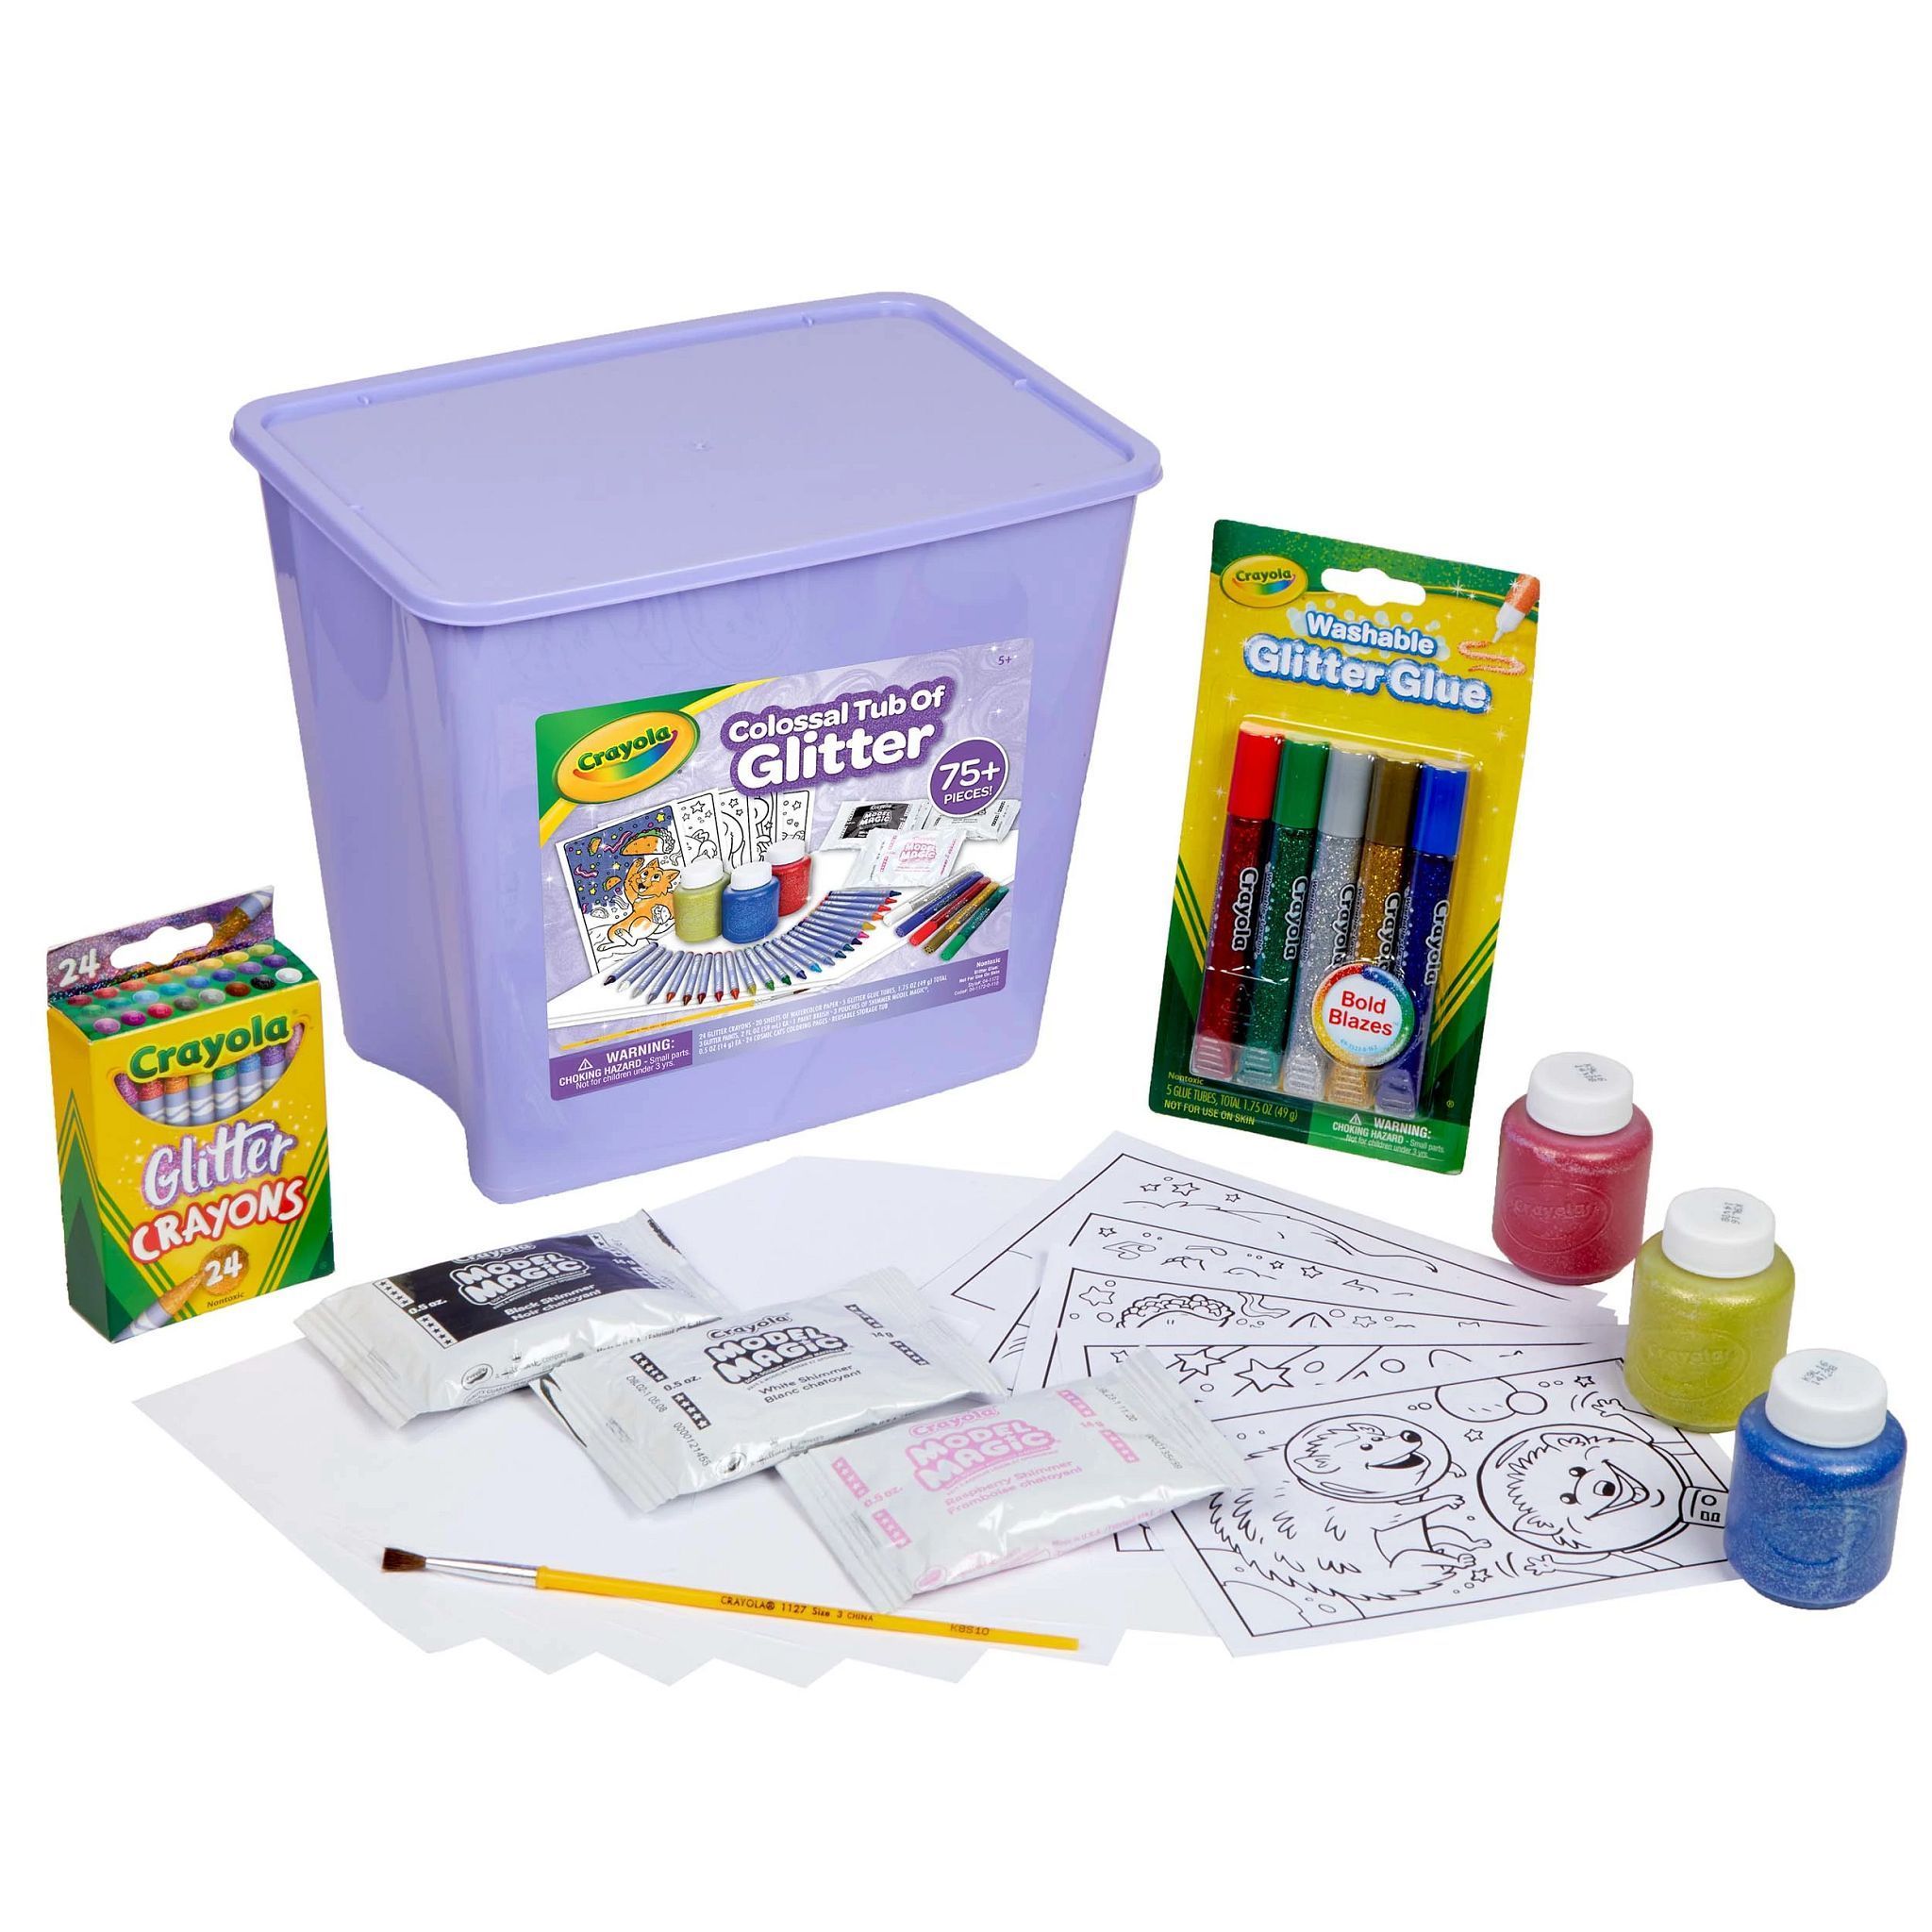 Crayola Glitter Arts and Crafts Kit, 80+ School Supplies, Glitter Toy, Creative Gift for Unisex Child - image 1 of 6